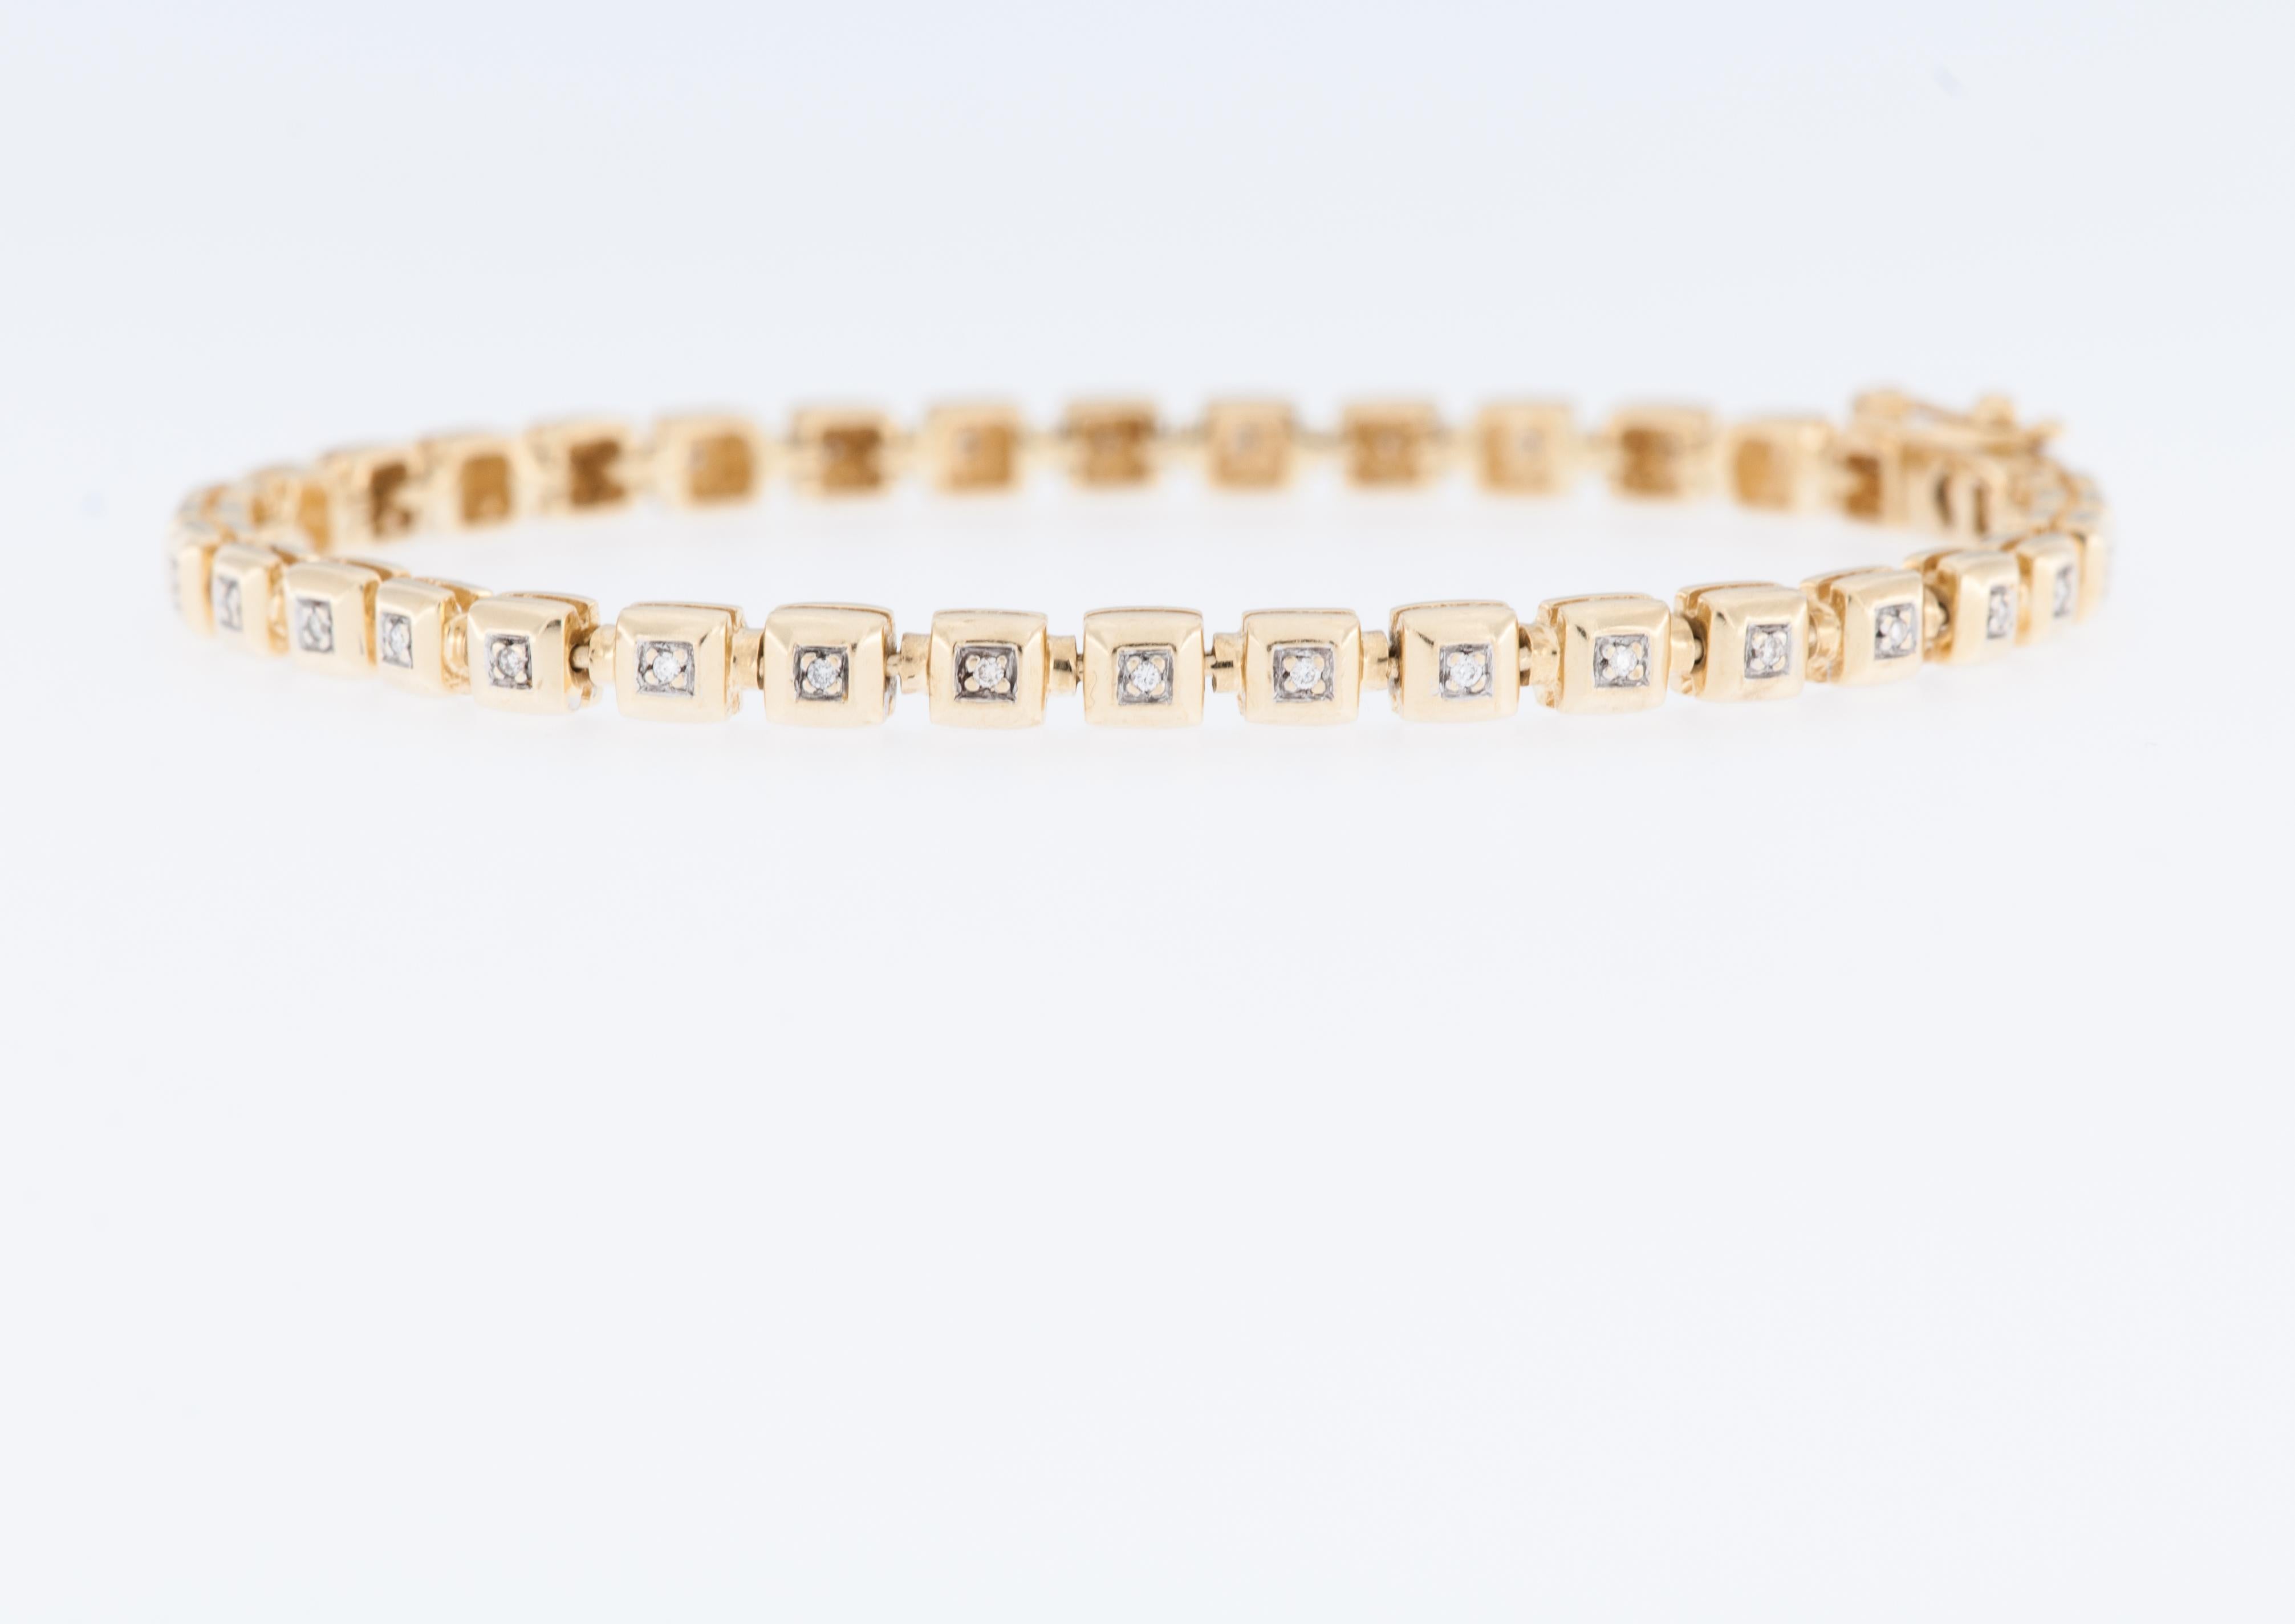 The Tennis 18kt Gold Squared French Bracelet with Diamonds is a luxurious and elegant piece of jewelry designed for those who appreciate fine craftsmanship and exquisite materials. Crafted from high-quality 18-karat gold, this bracelet exudes a rich